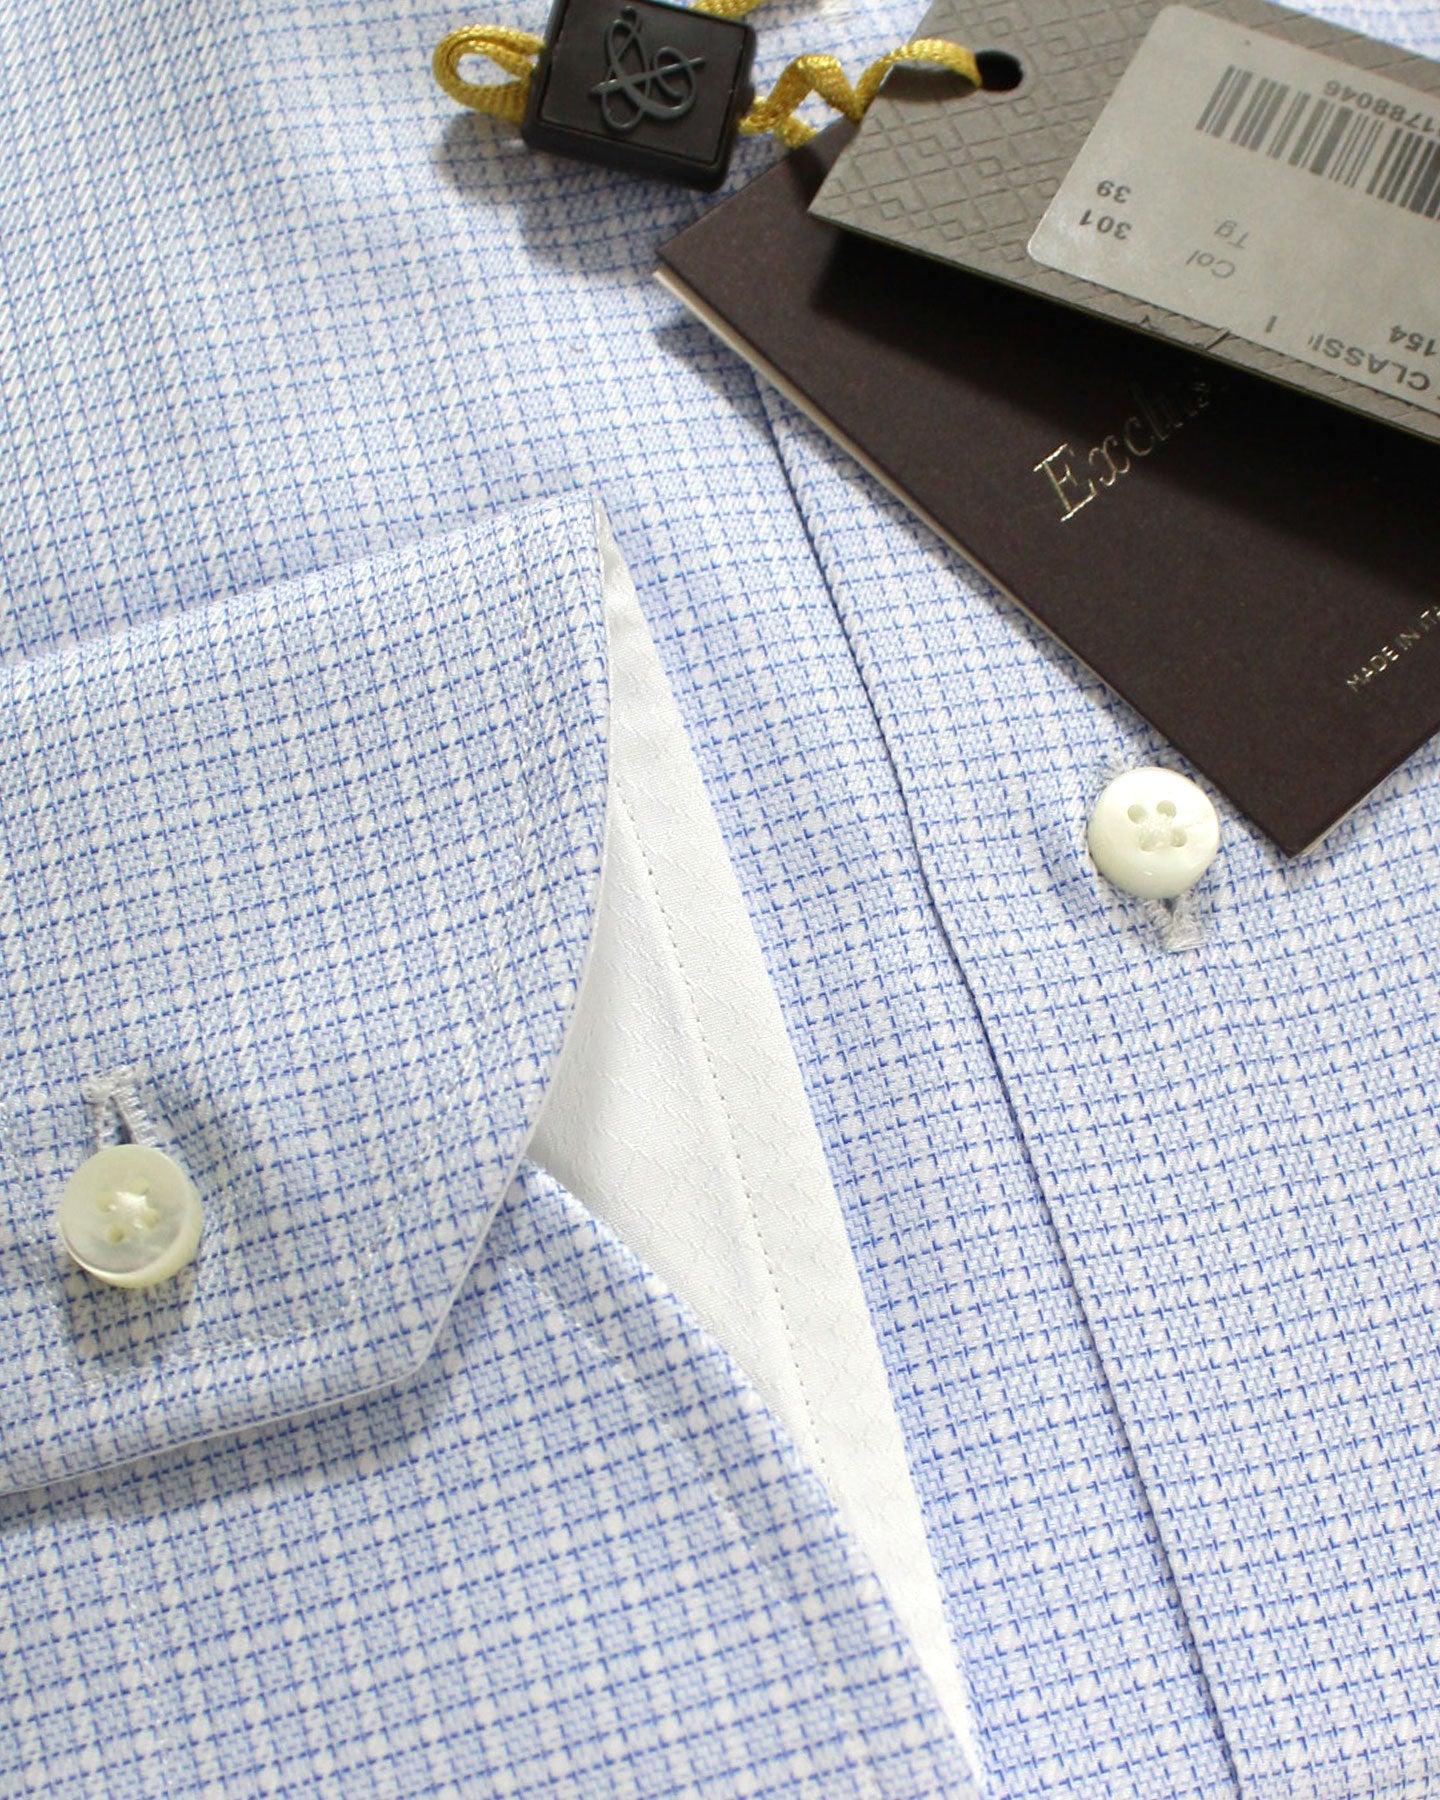 Canali Dress Shirt White Blue Navy Pattern Exclusive Collection